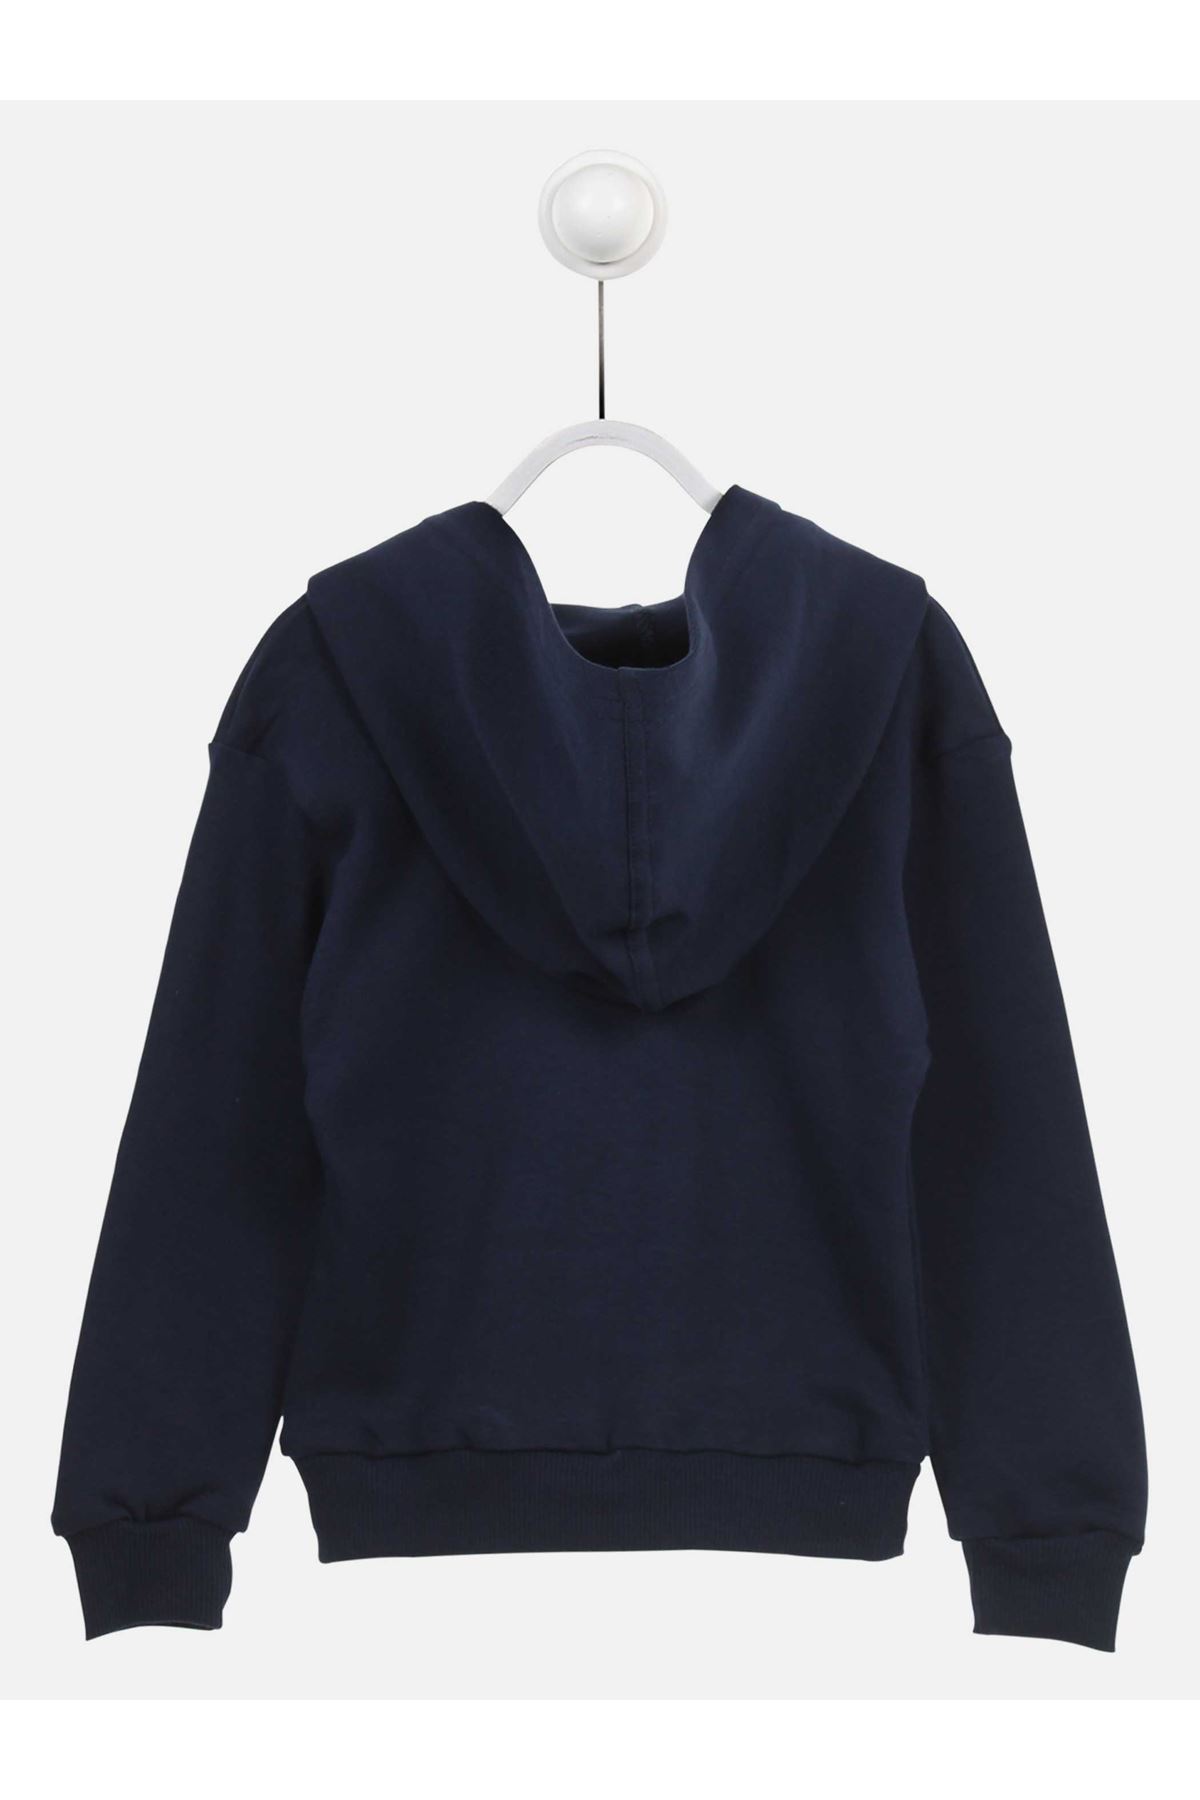 Navy Blue Male Child Hooded Sweat